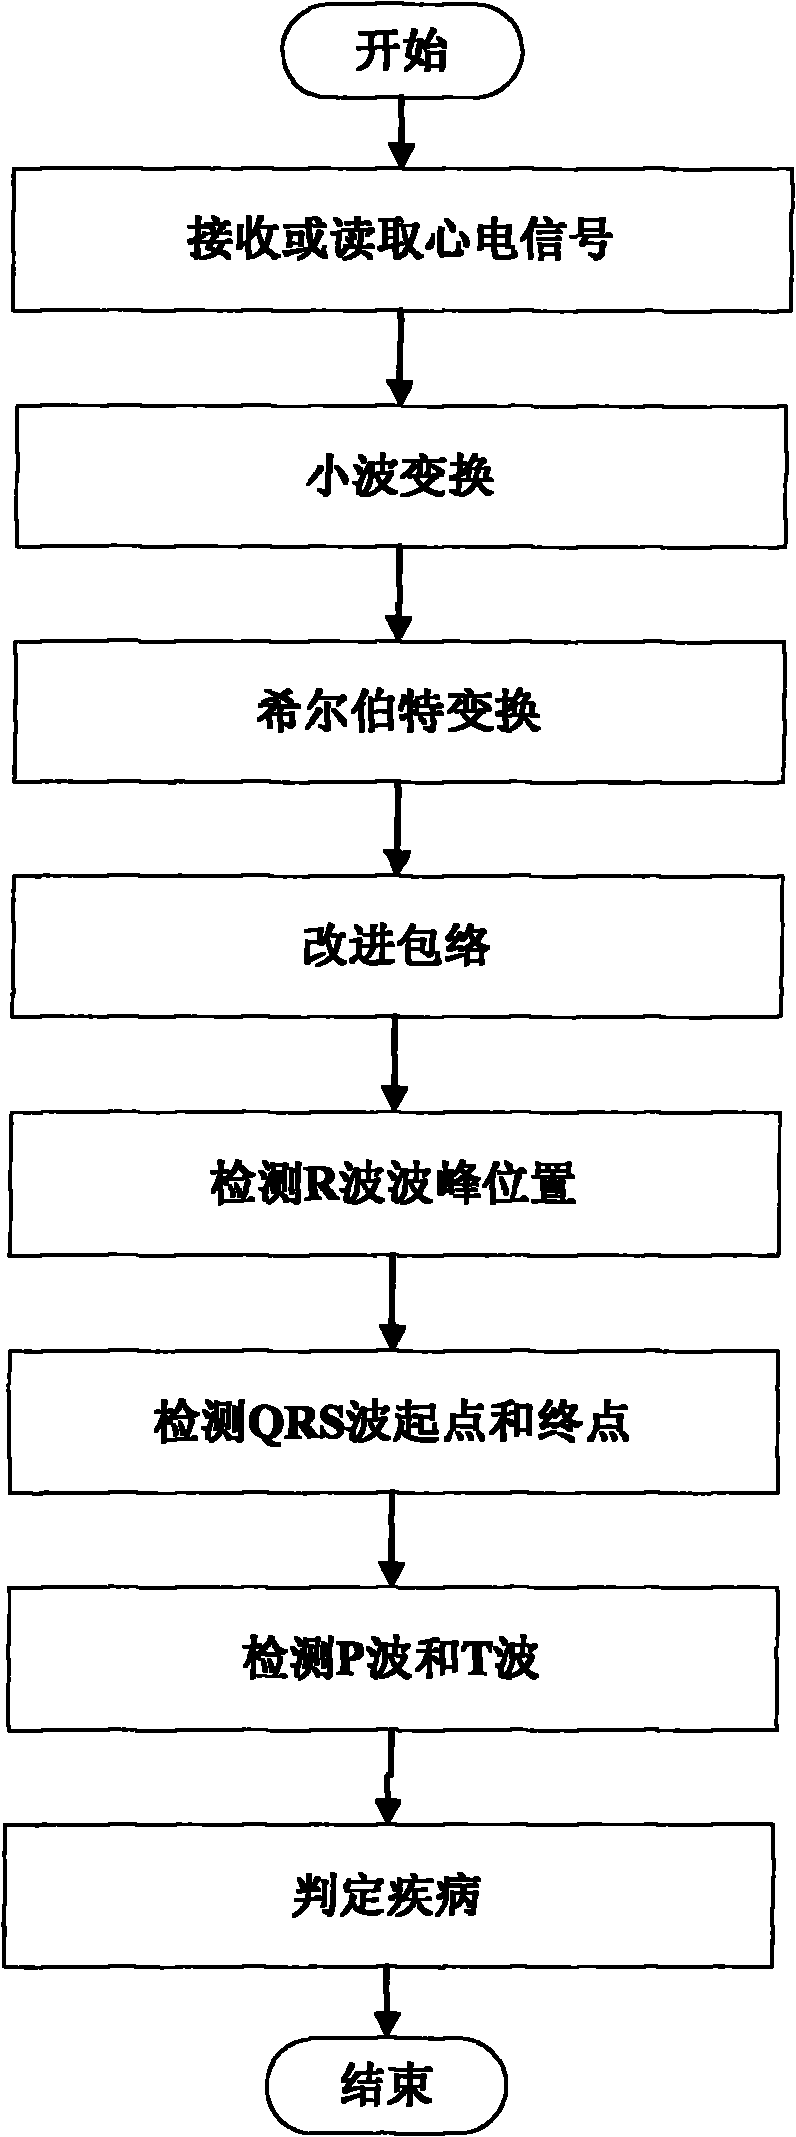 Realization of comprehensive detection algorithm of electrocardiogram signal at application layer electrocardiogram monitoring internet of thing